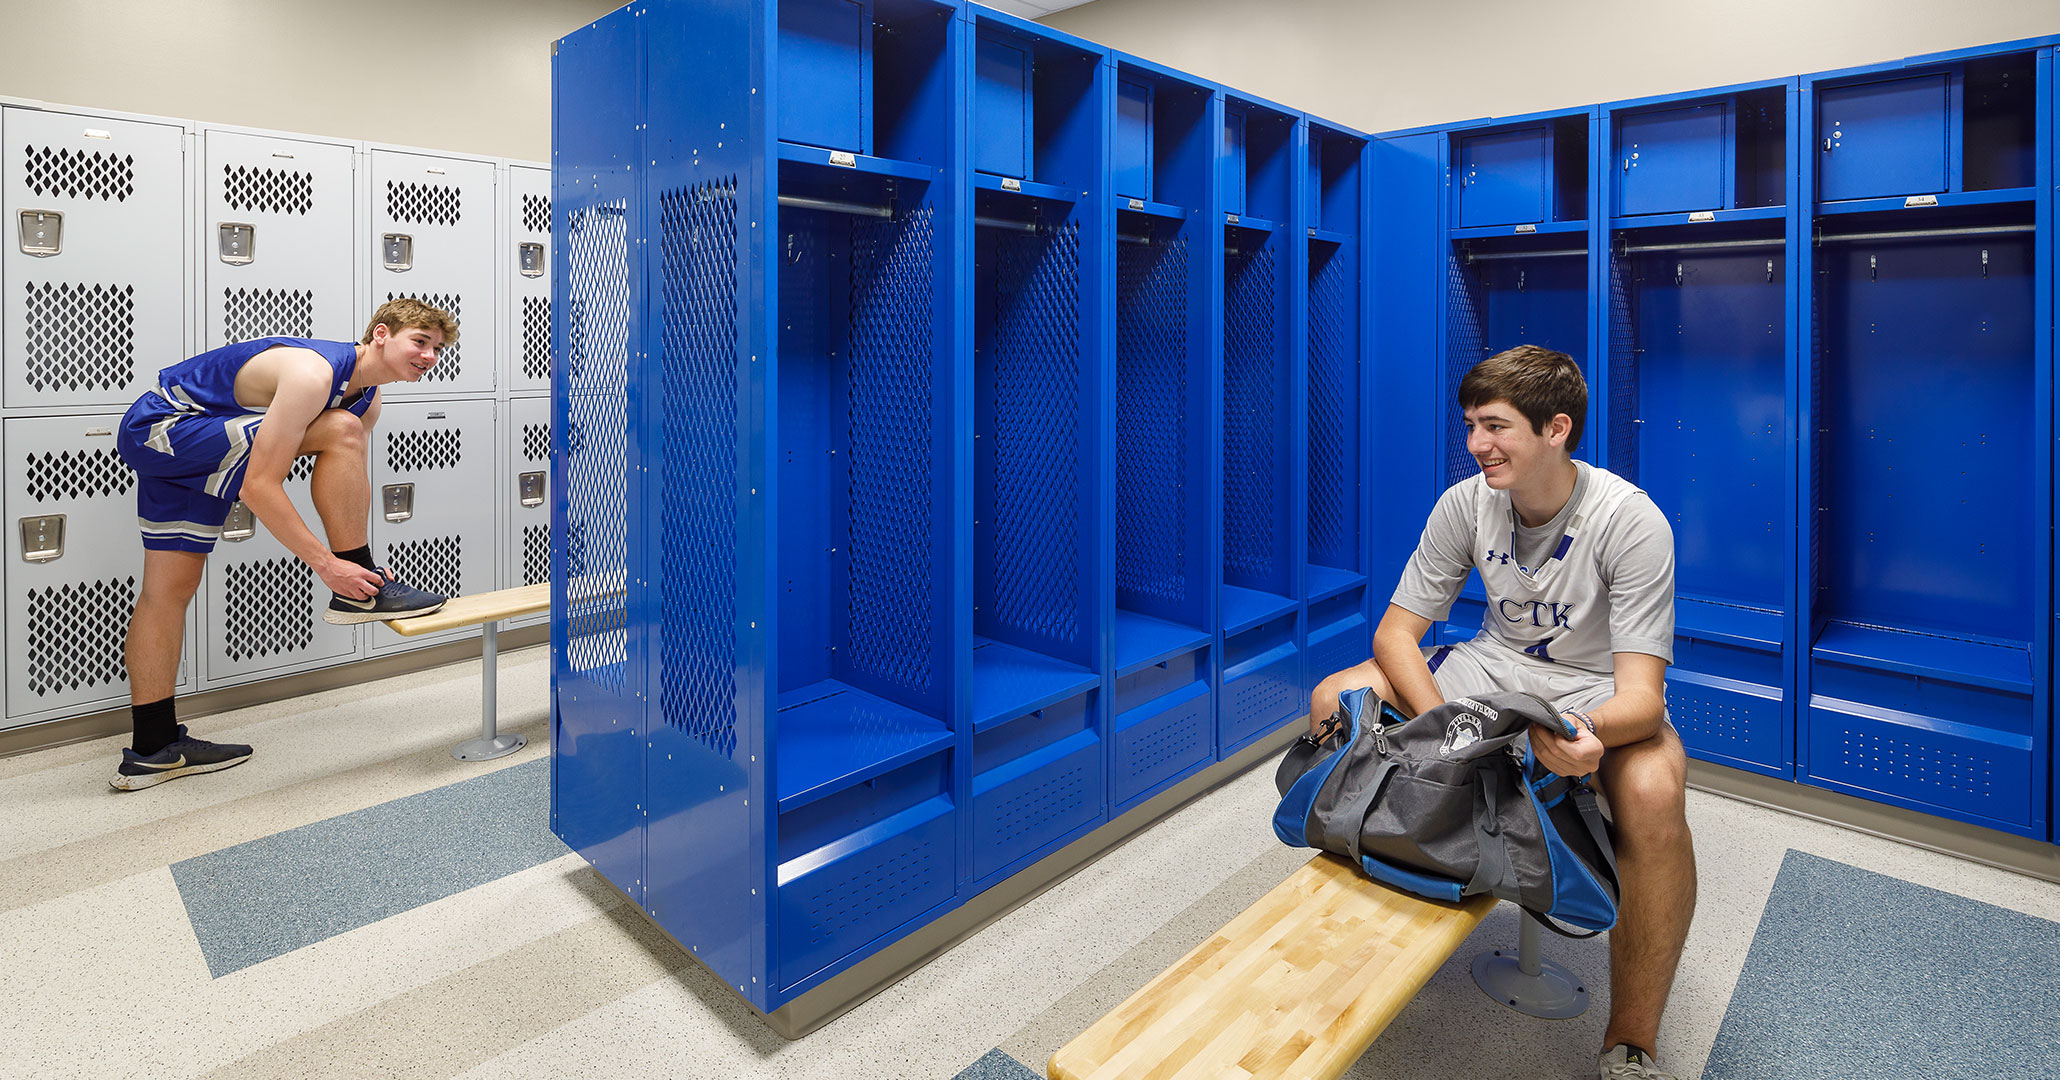 The Charlotte Diocese and Christ the King Catholic High School worked with Boudreaux master planners and architects to design the school’s athletic center and locker rooms.